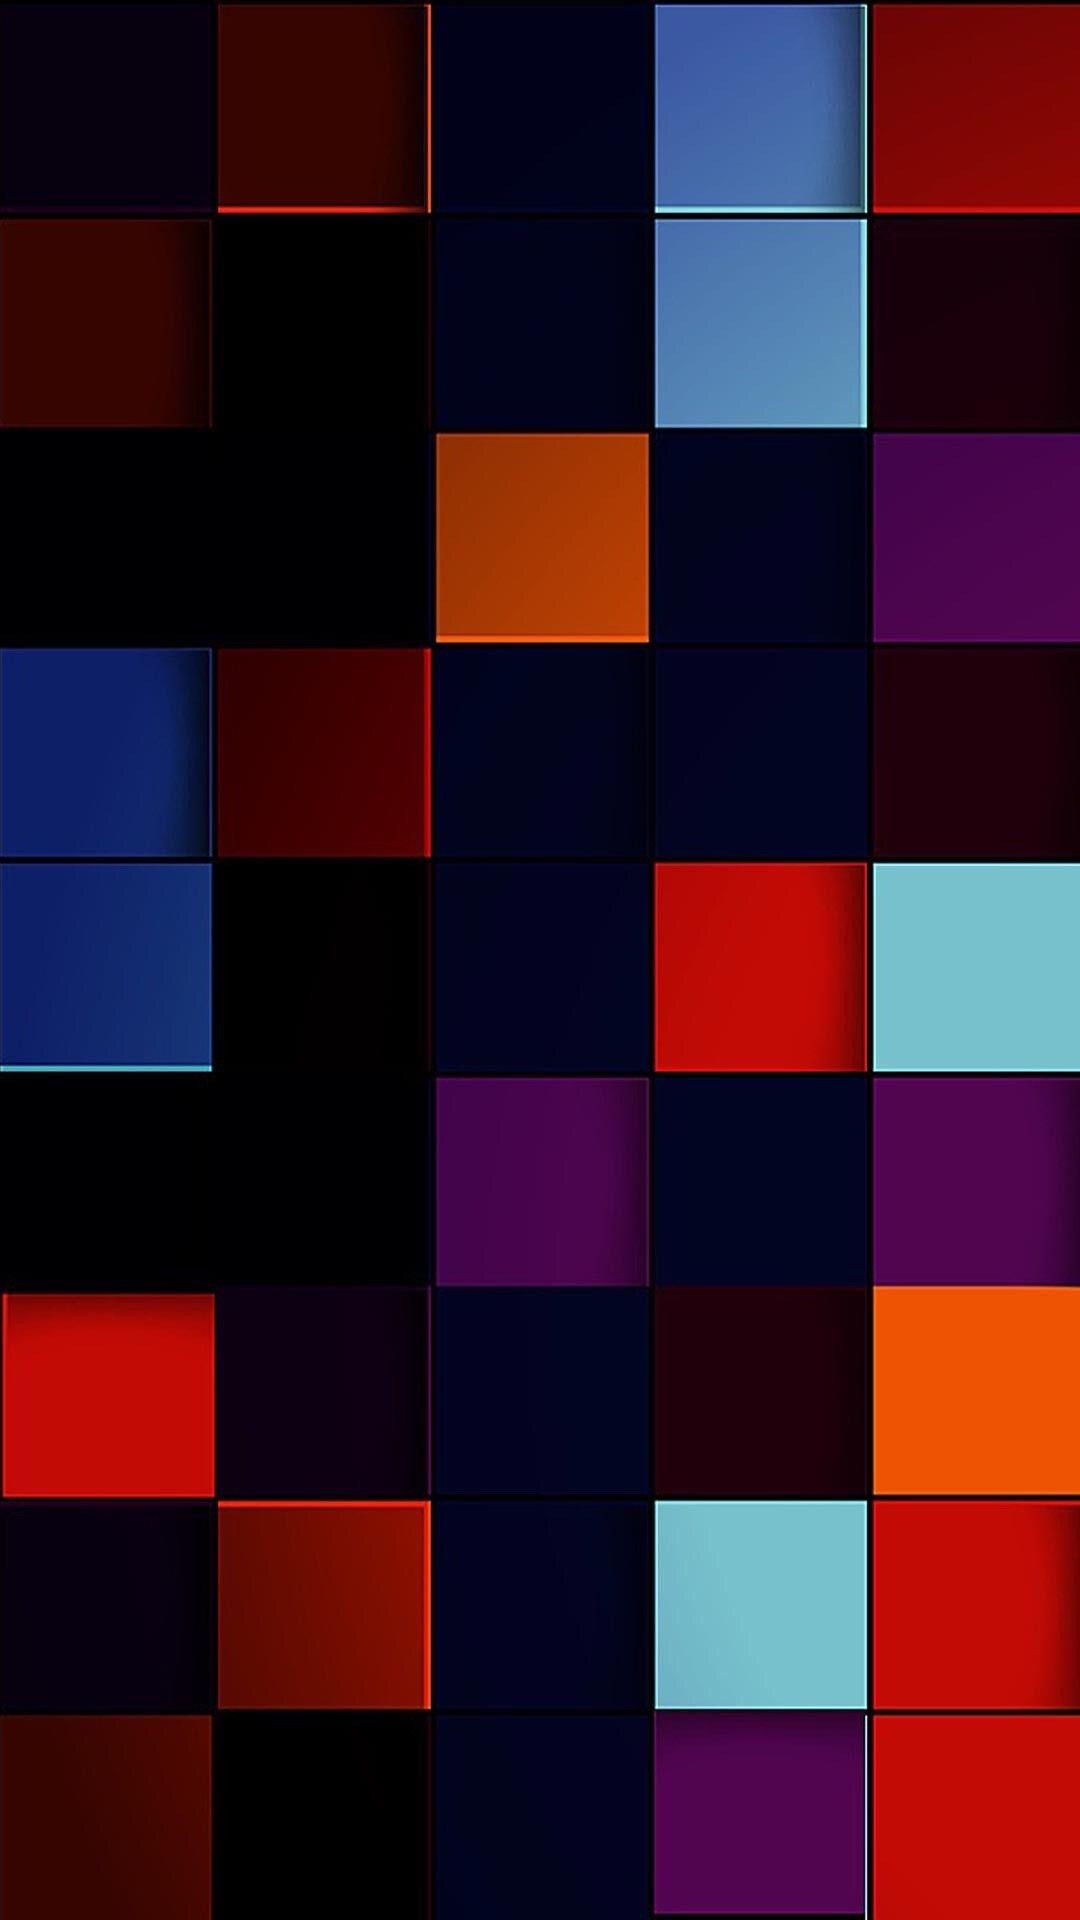 Colorful Geometric Shapes Wallpaper. *Abstract and Geometric